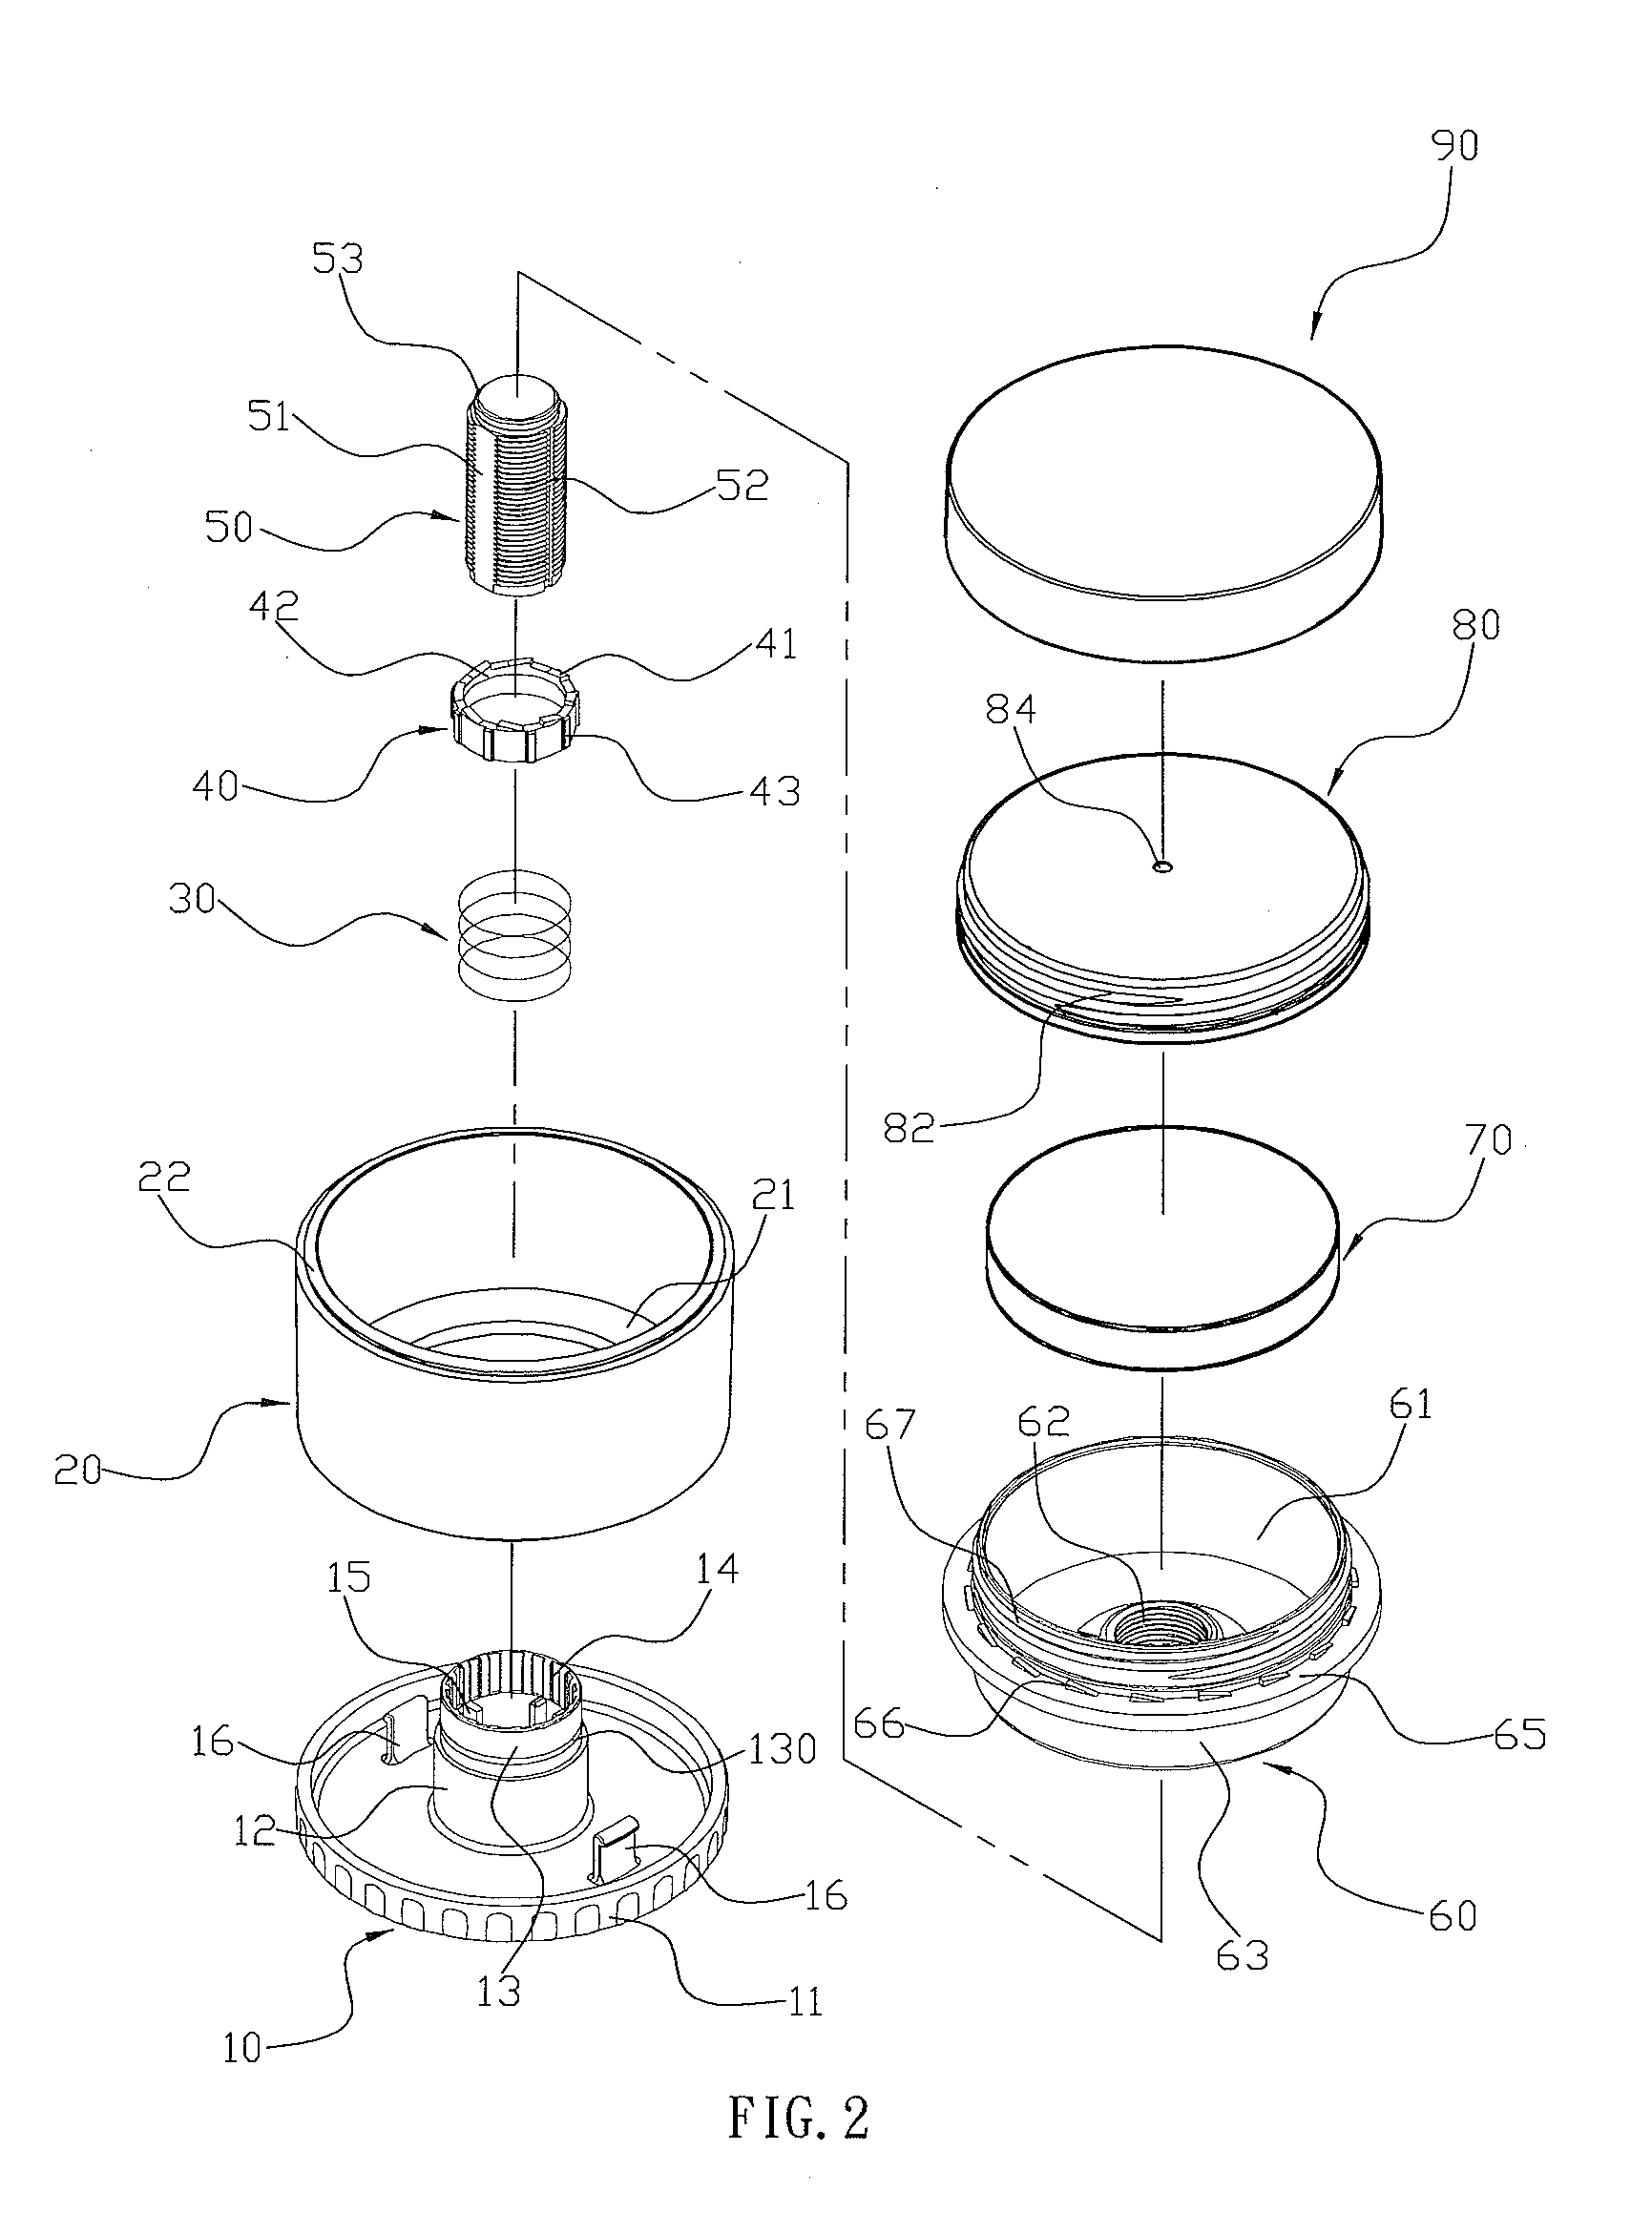 Vacuum Cream Container that is Operable by Rotation to Squeeze Cream Outward